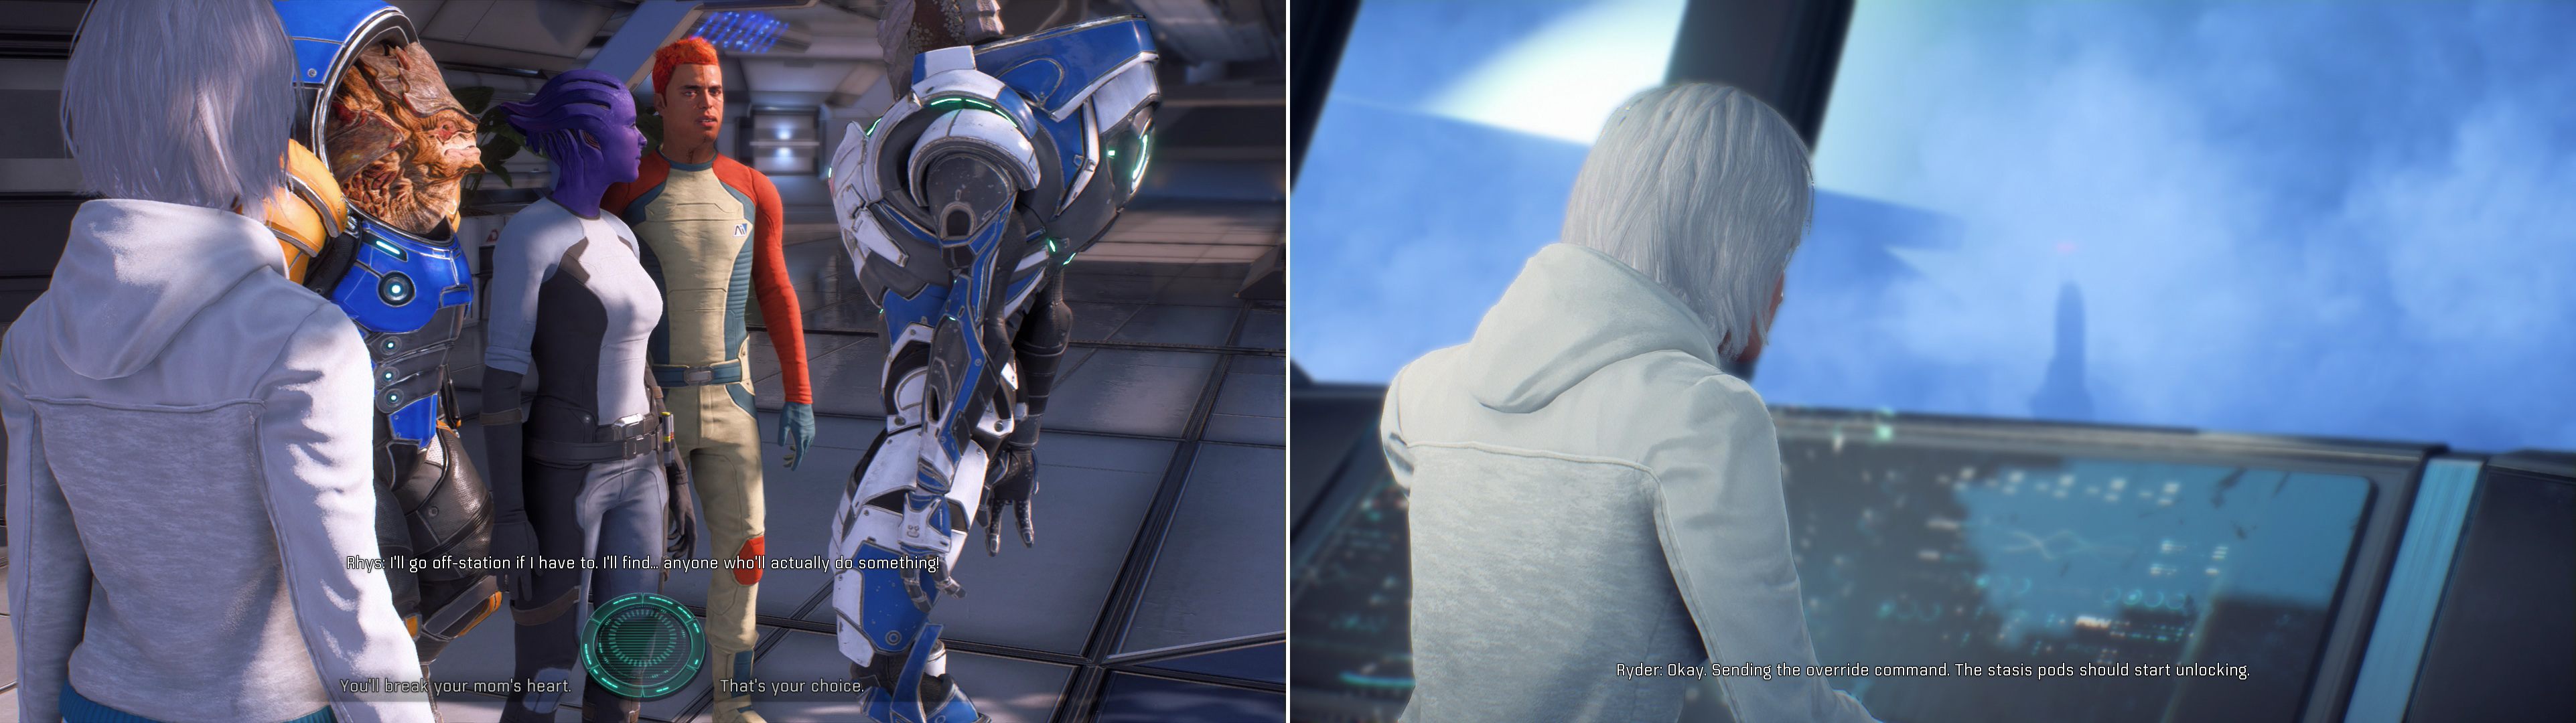 If you side against the angry colonists, shame them into staying or let them leave (left). On the other hand, if you pull their relatives out of cryo, theyll naturally be much happier (right).